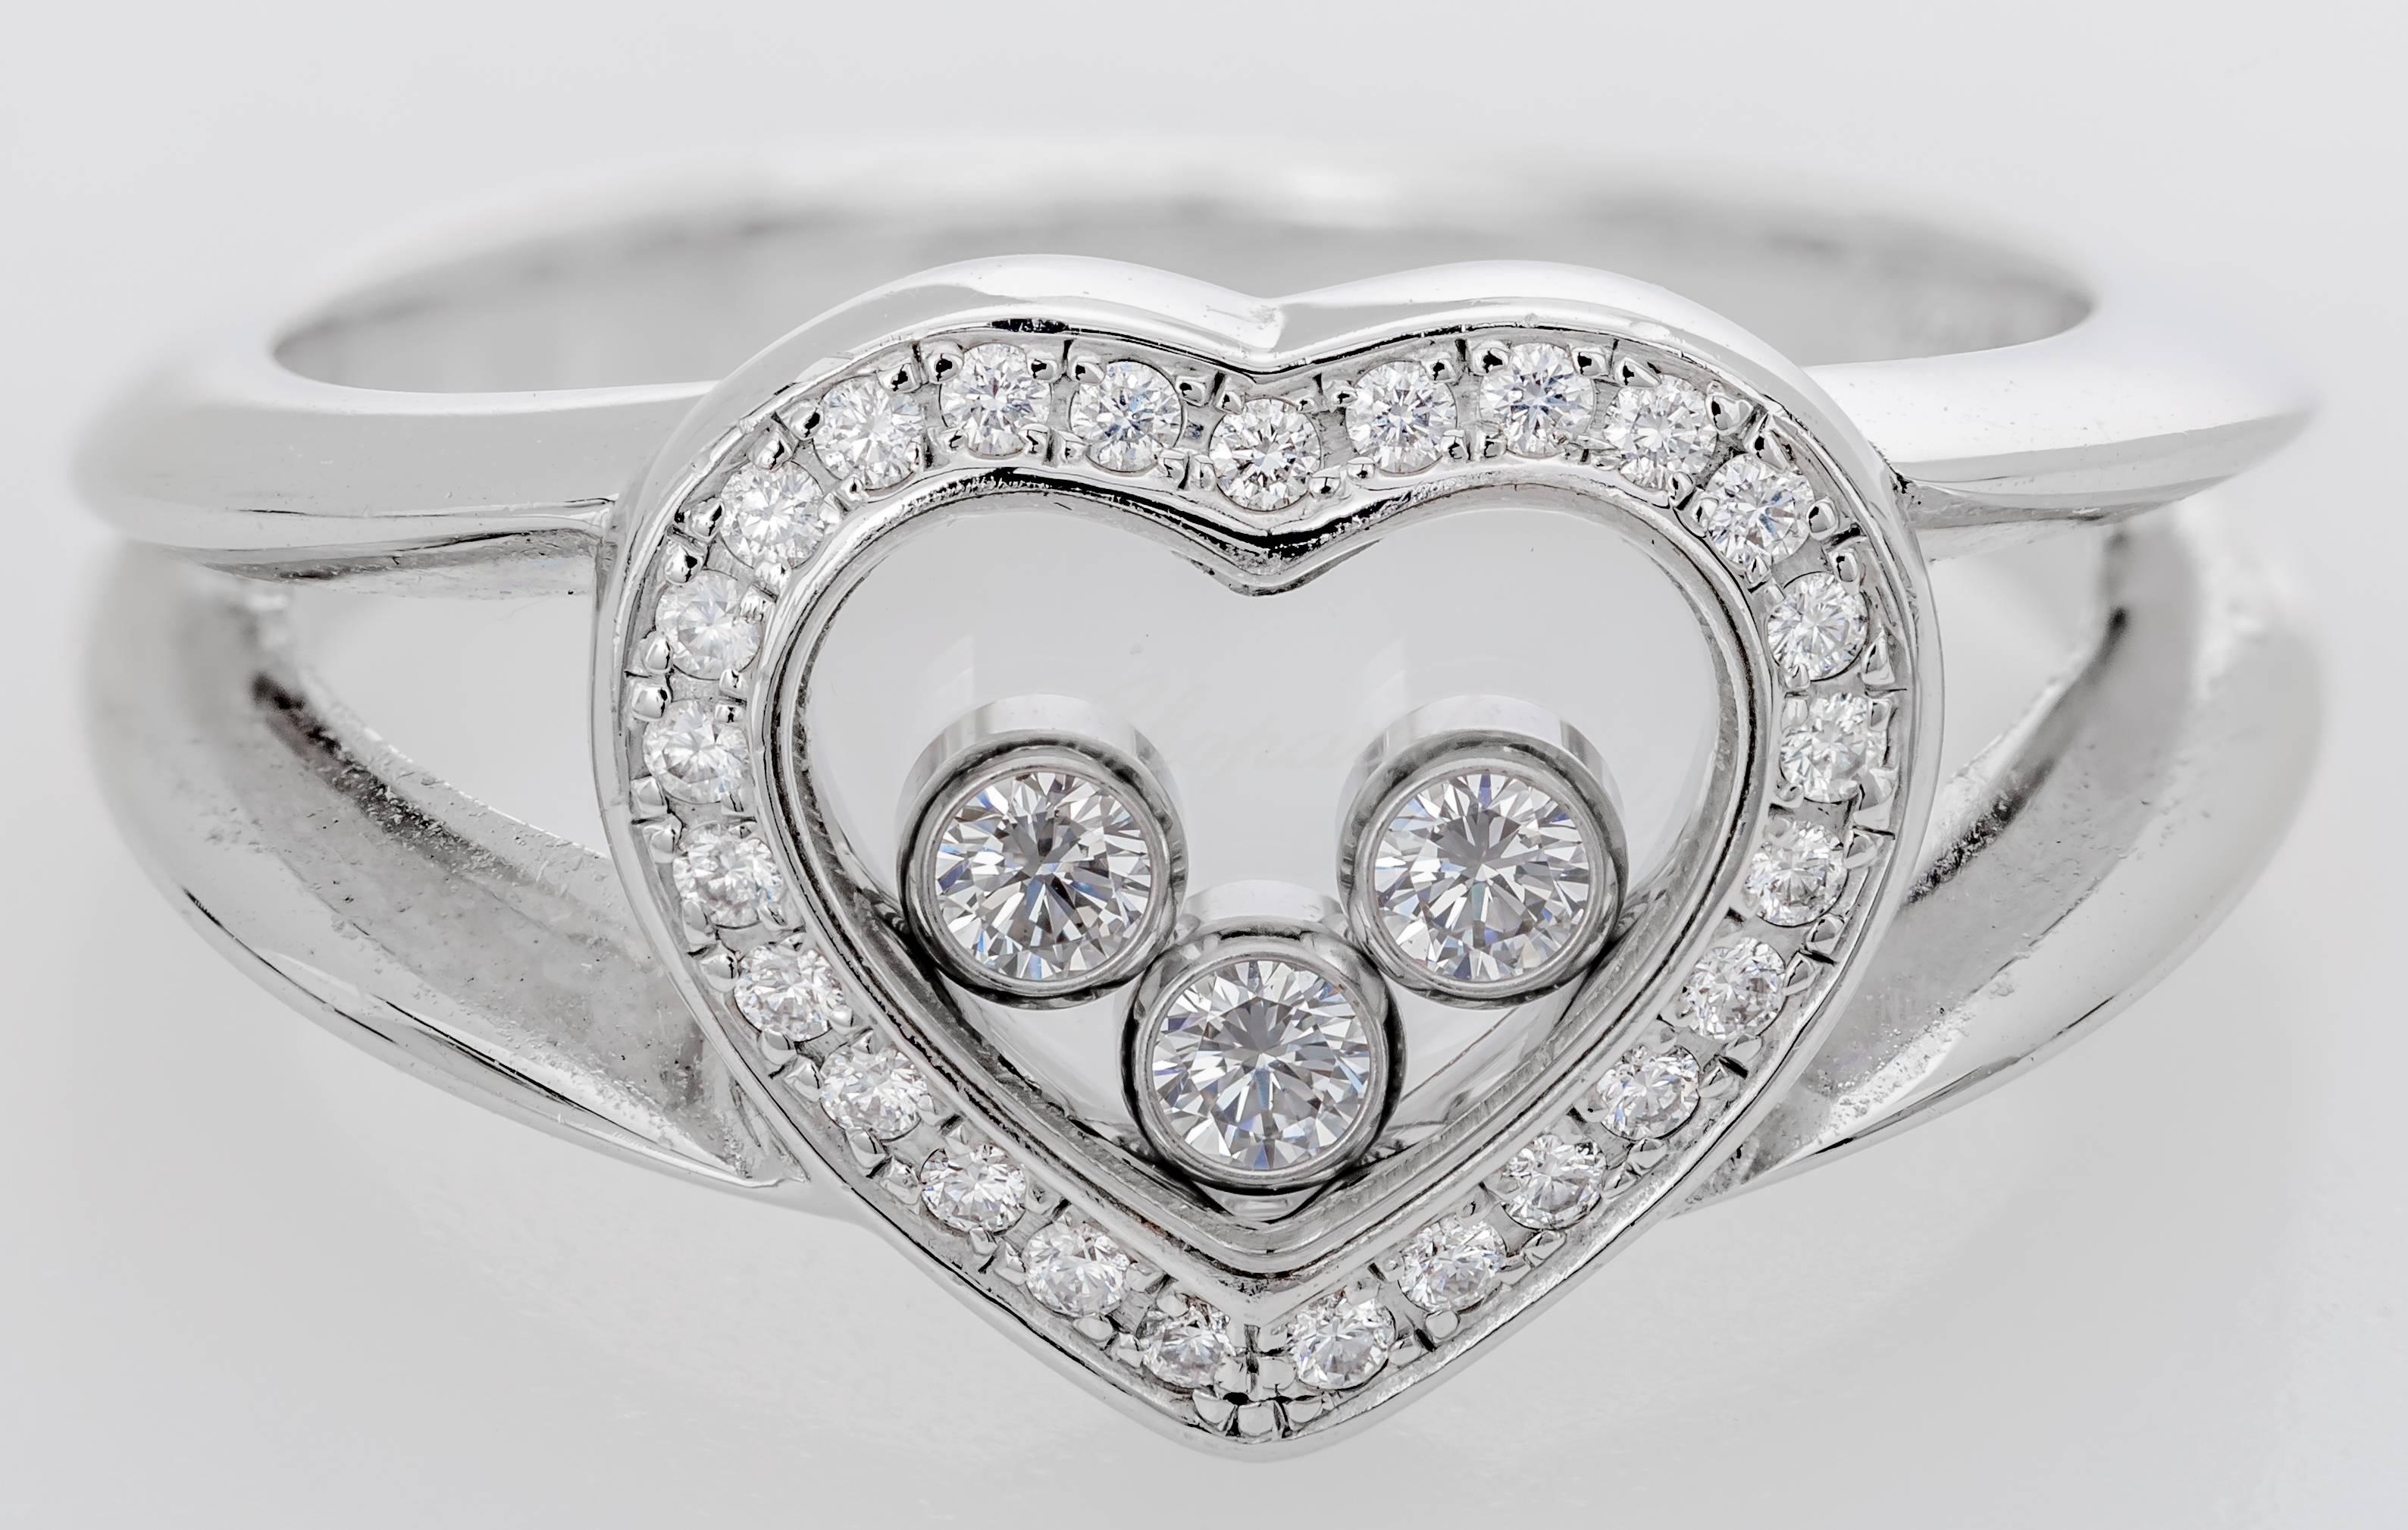 This new Chopard Happy Heart ring features three floating diamonds inside of a heart.  The heart is made of 25 diamonds totaling 0.10 ct with the three floating diamonds totaling 0.17 ct.  The ring is 18k white gold.  The ring is a size 5.5 and it